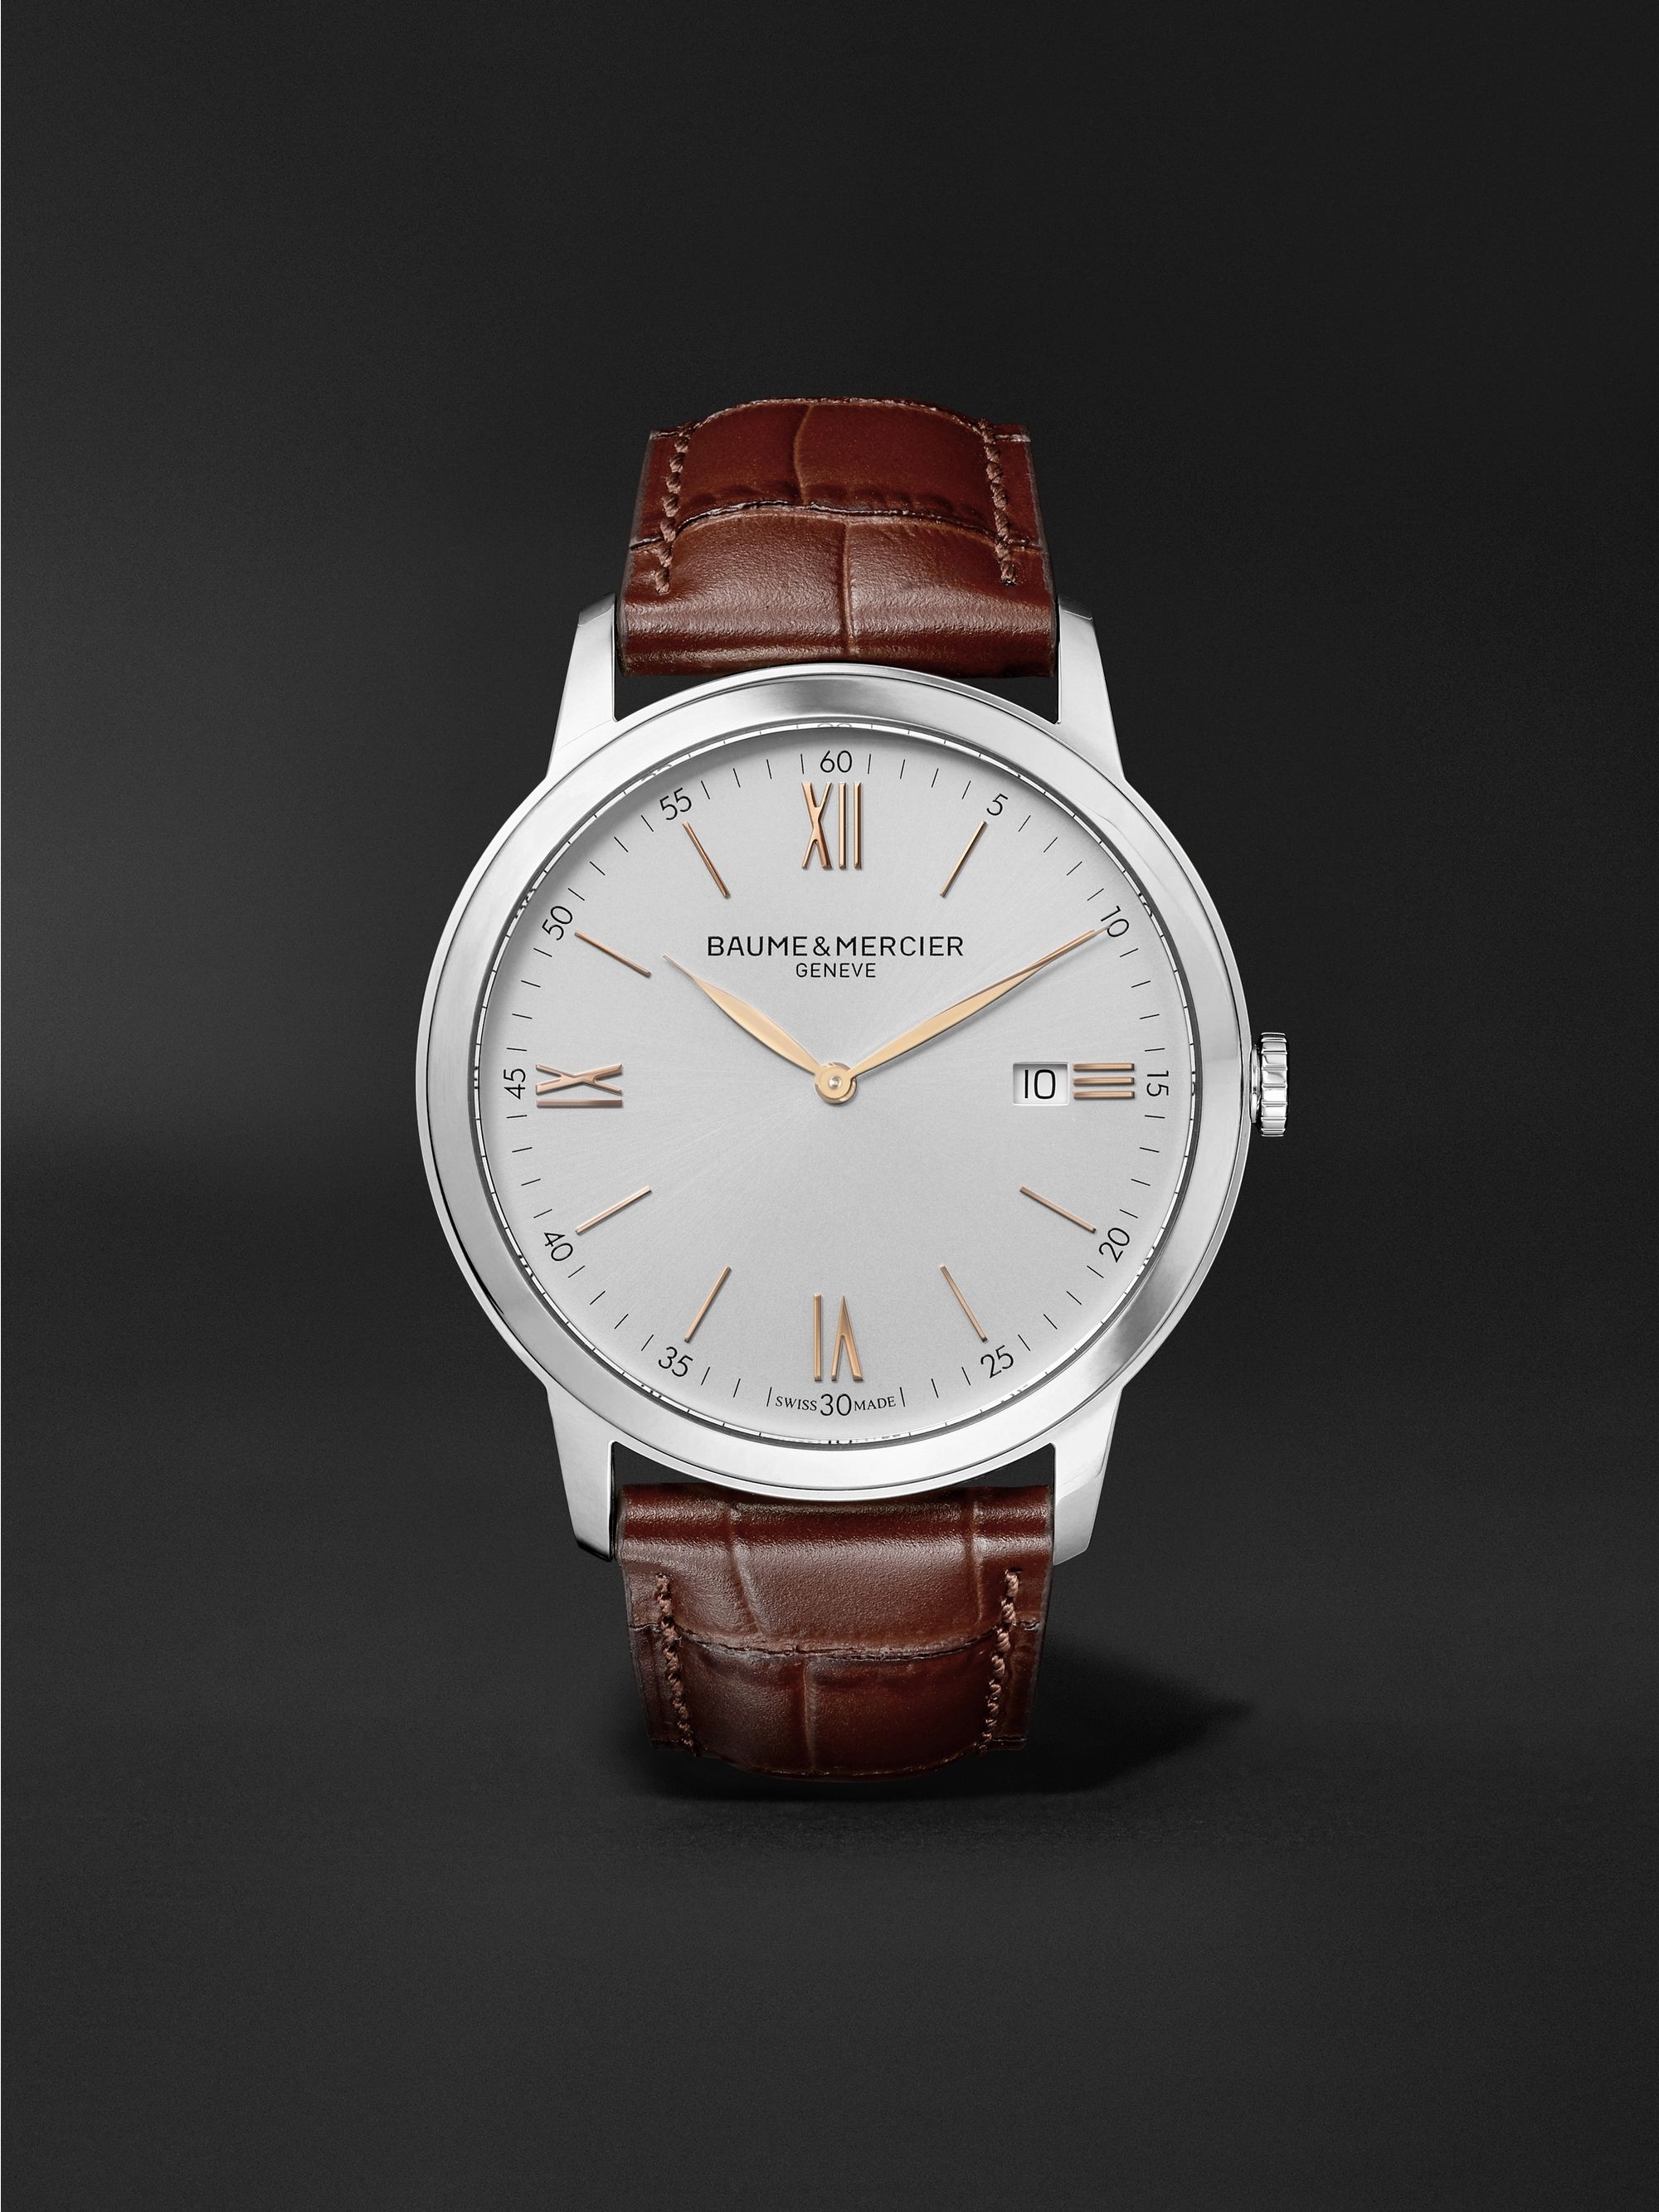 BAUME & MERCIER Classima 42mm Stainless Steel and Croc-Effect Leather Watch, Ref. No. 10415